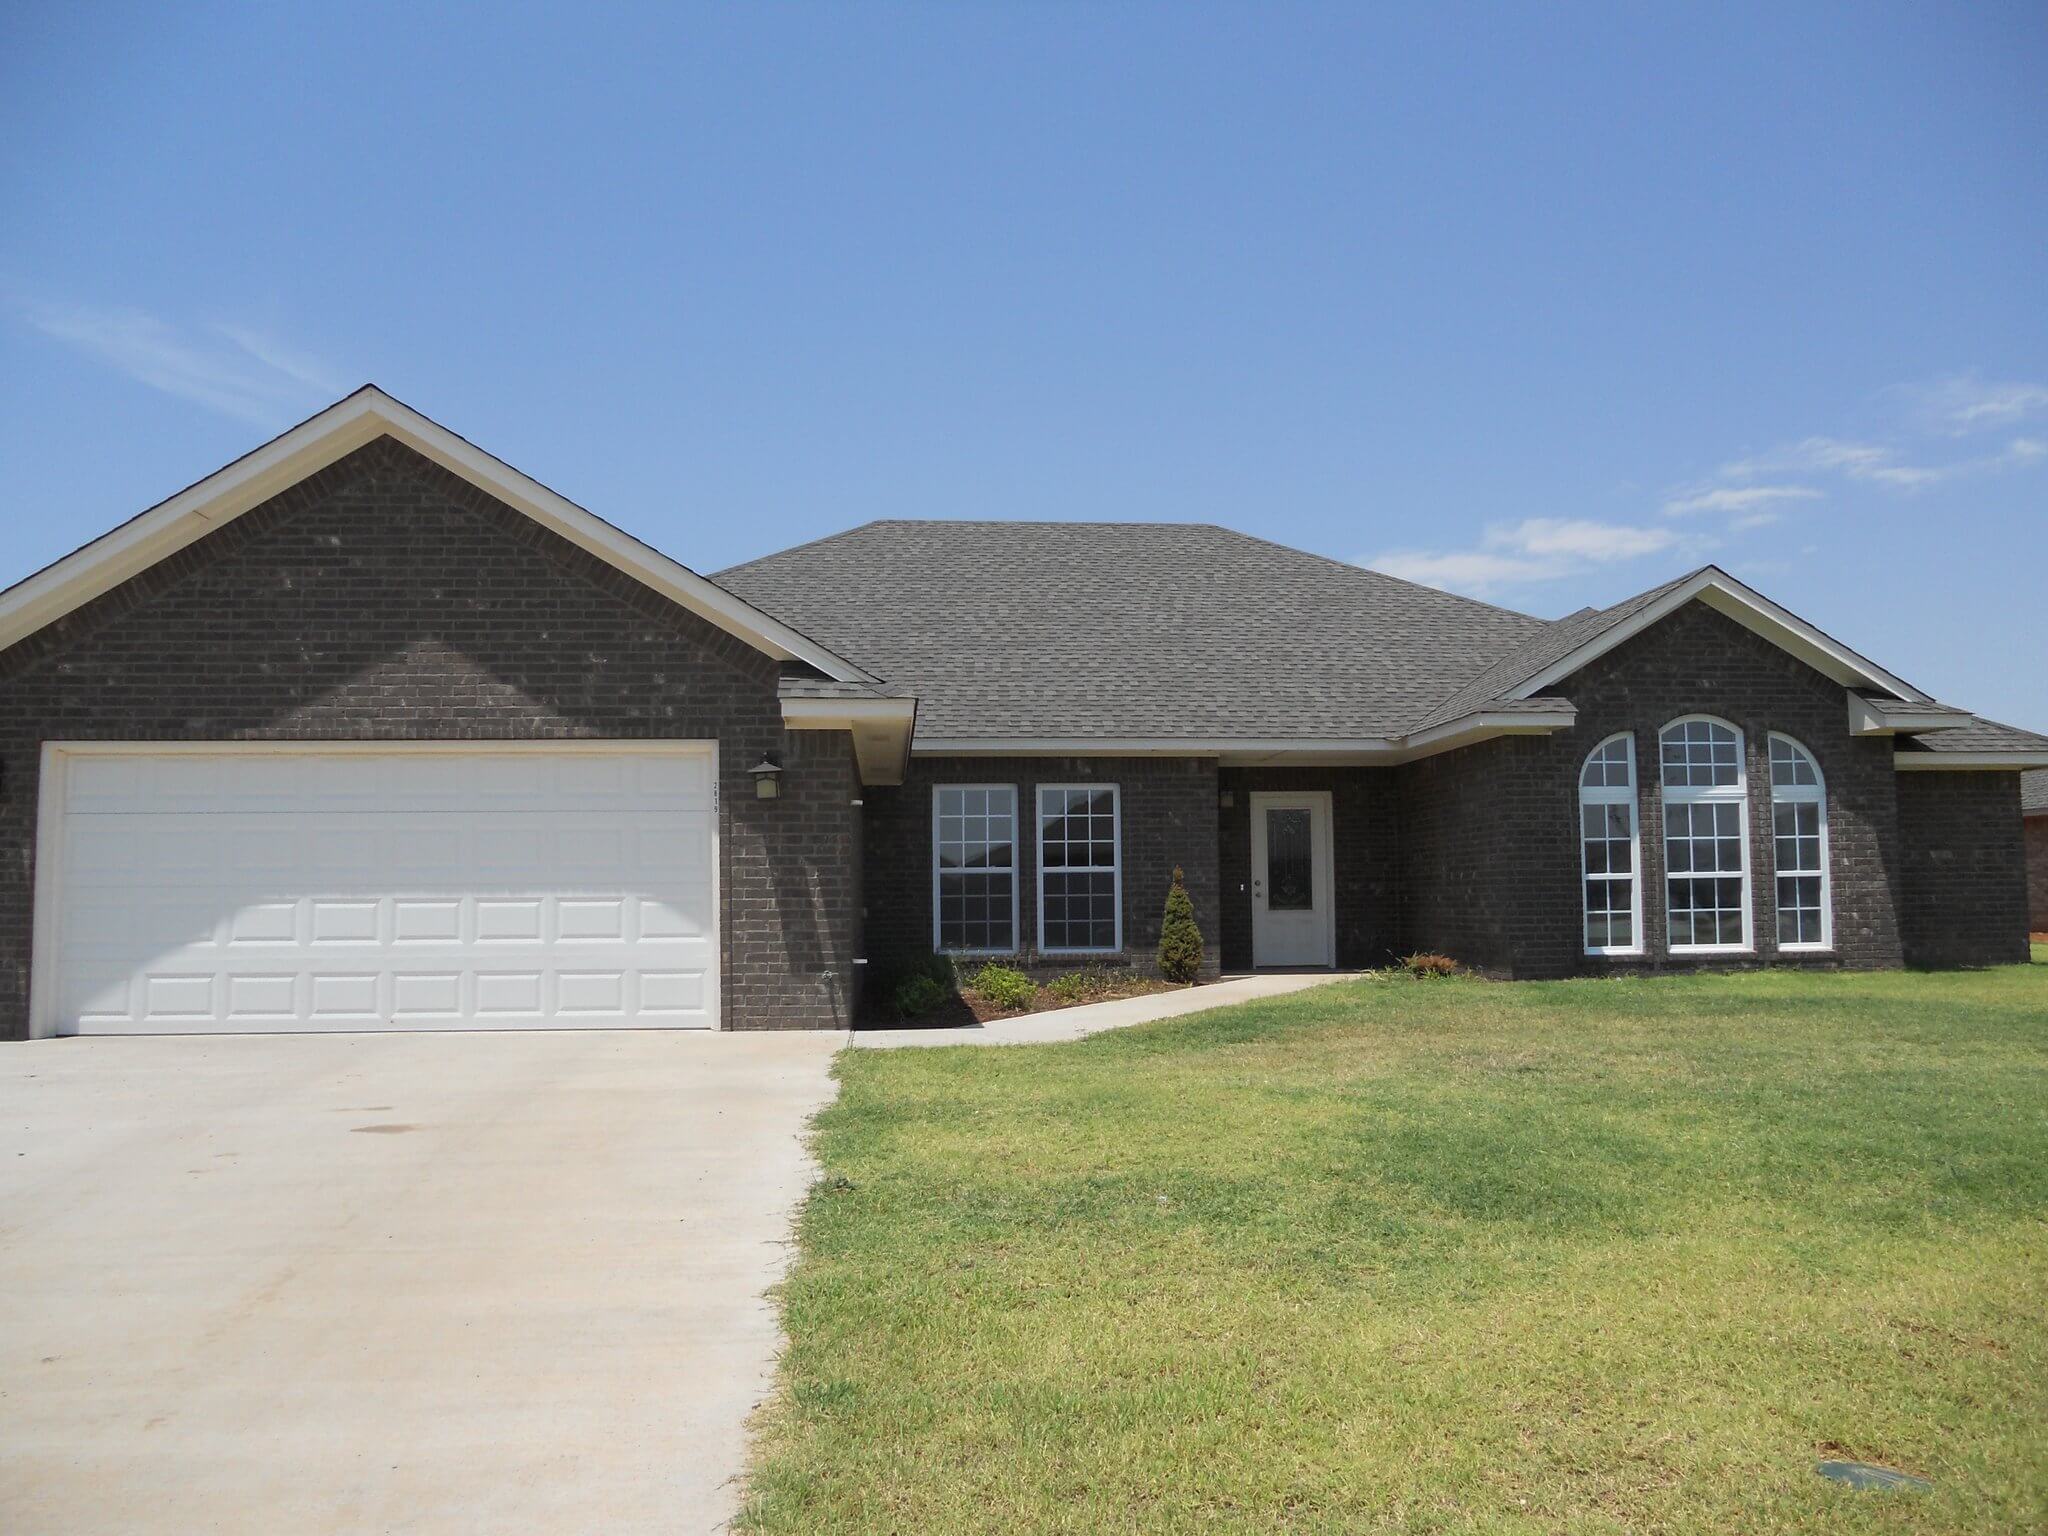 Front of House - Deer Run tdy house rental in Altus, OK near Altus AFB